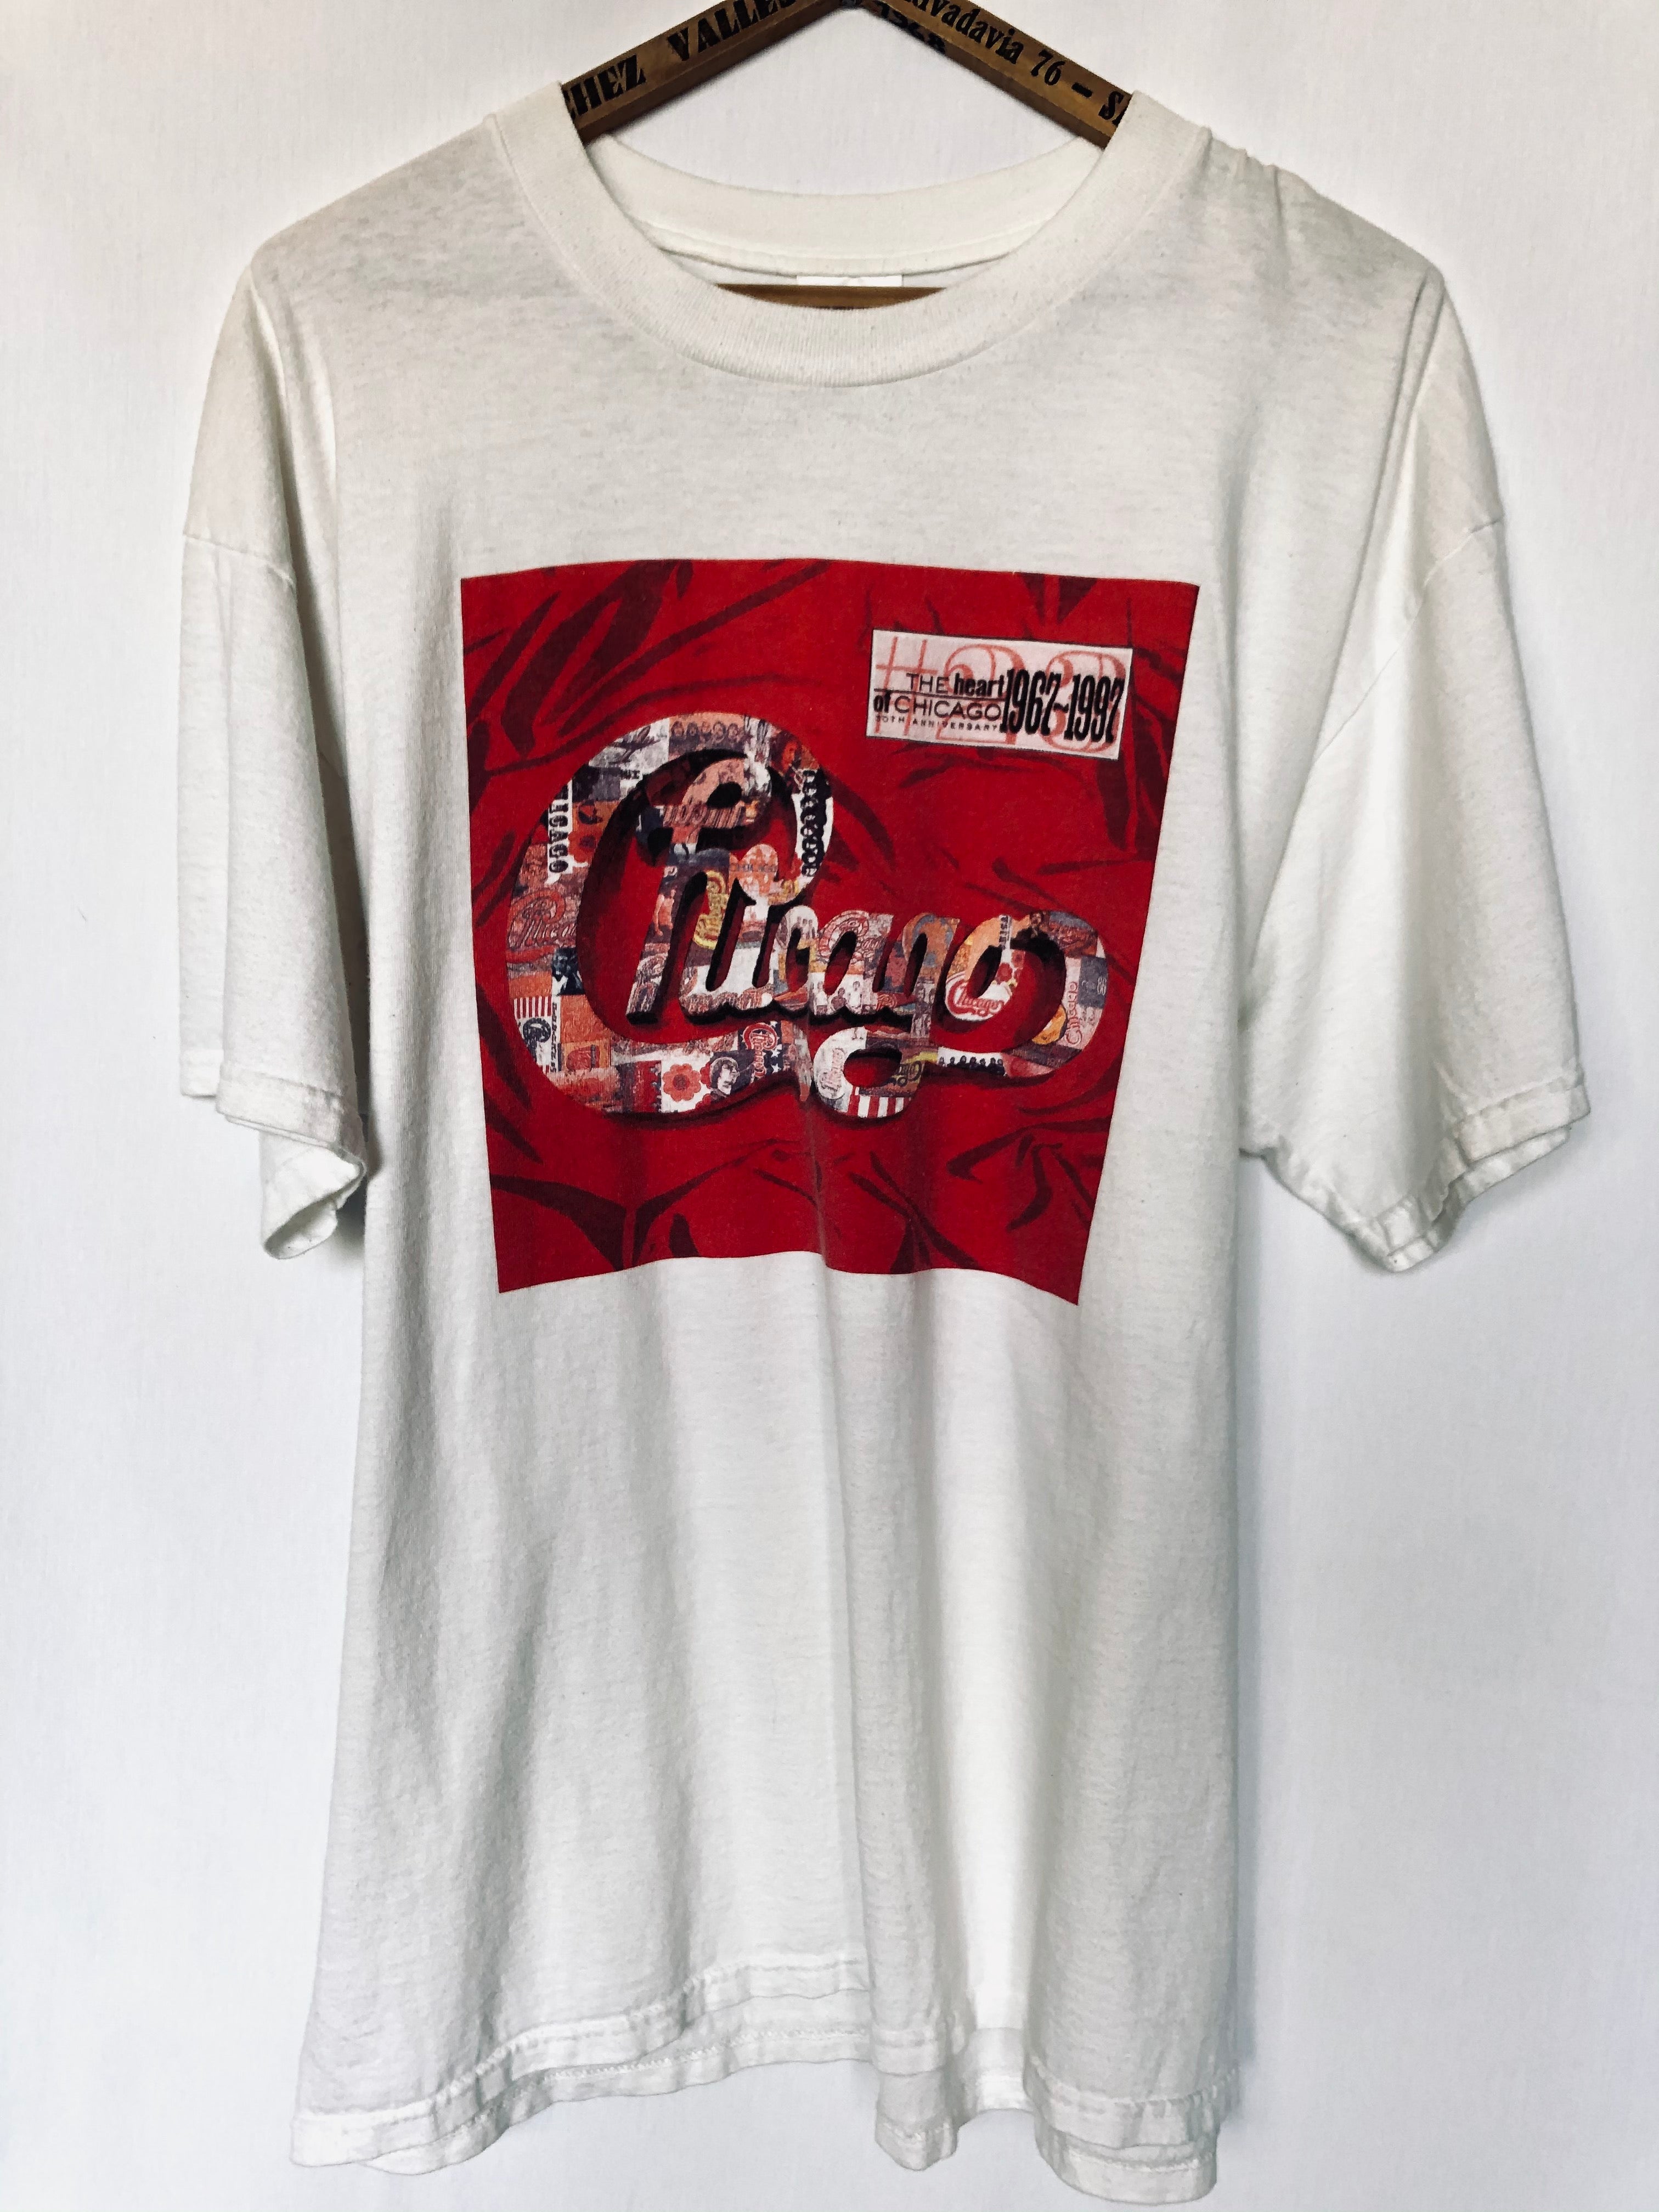 Authentic 98’ Chicago 30th Anniversary Tour Tee